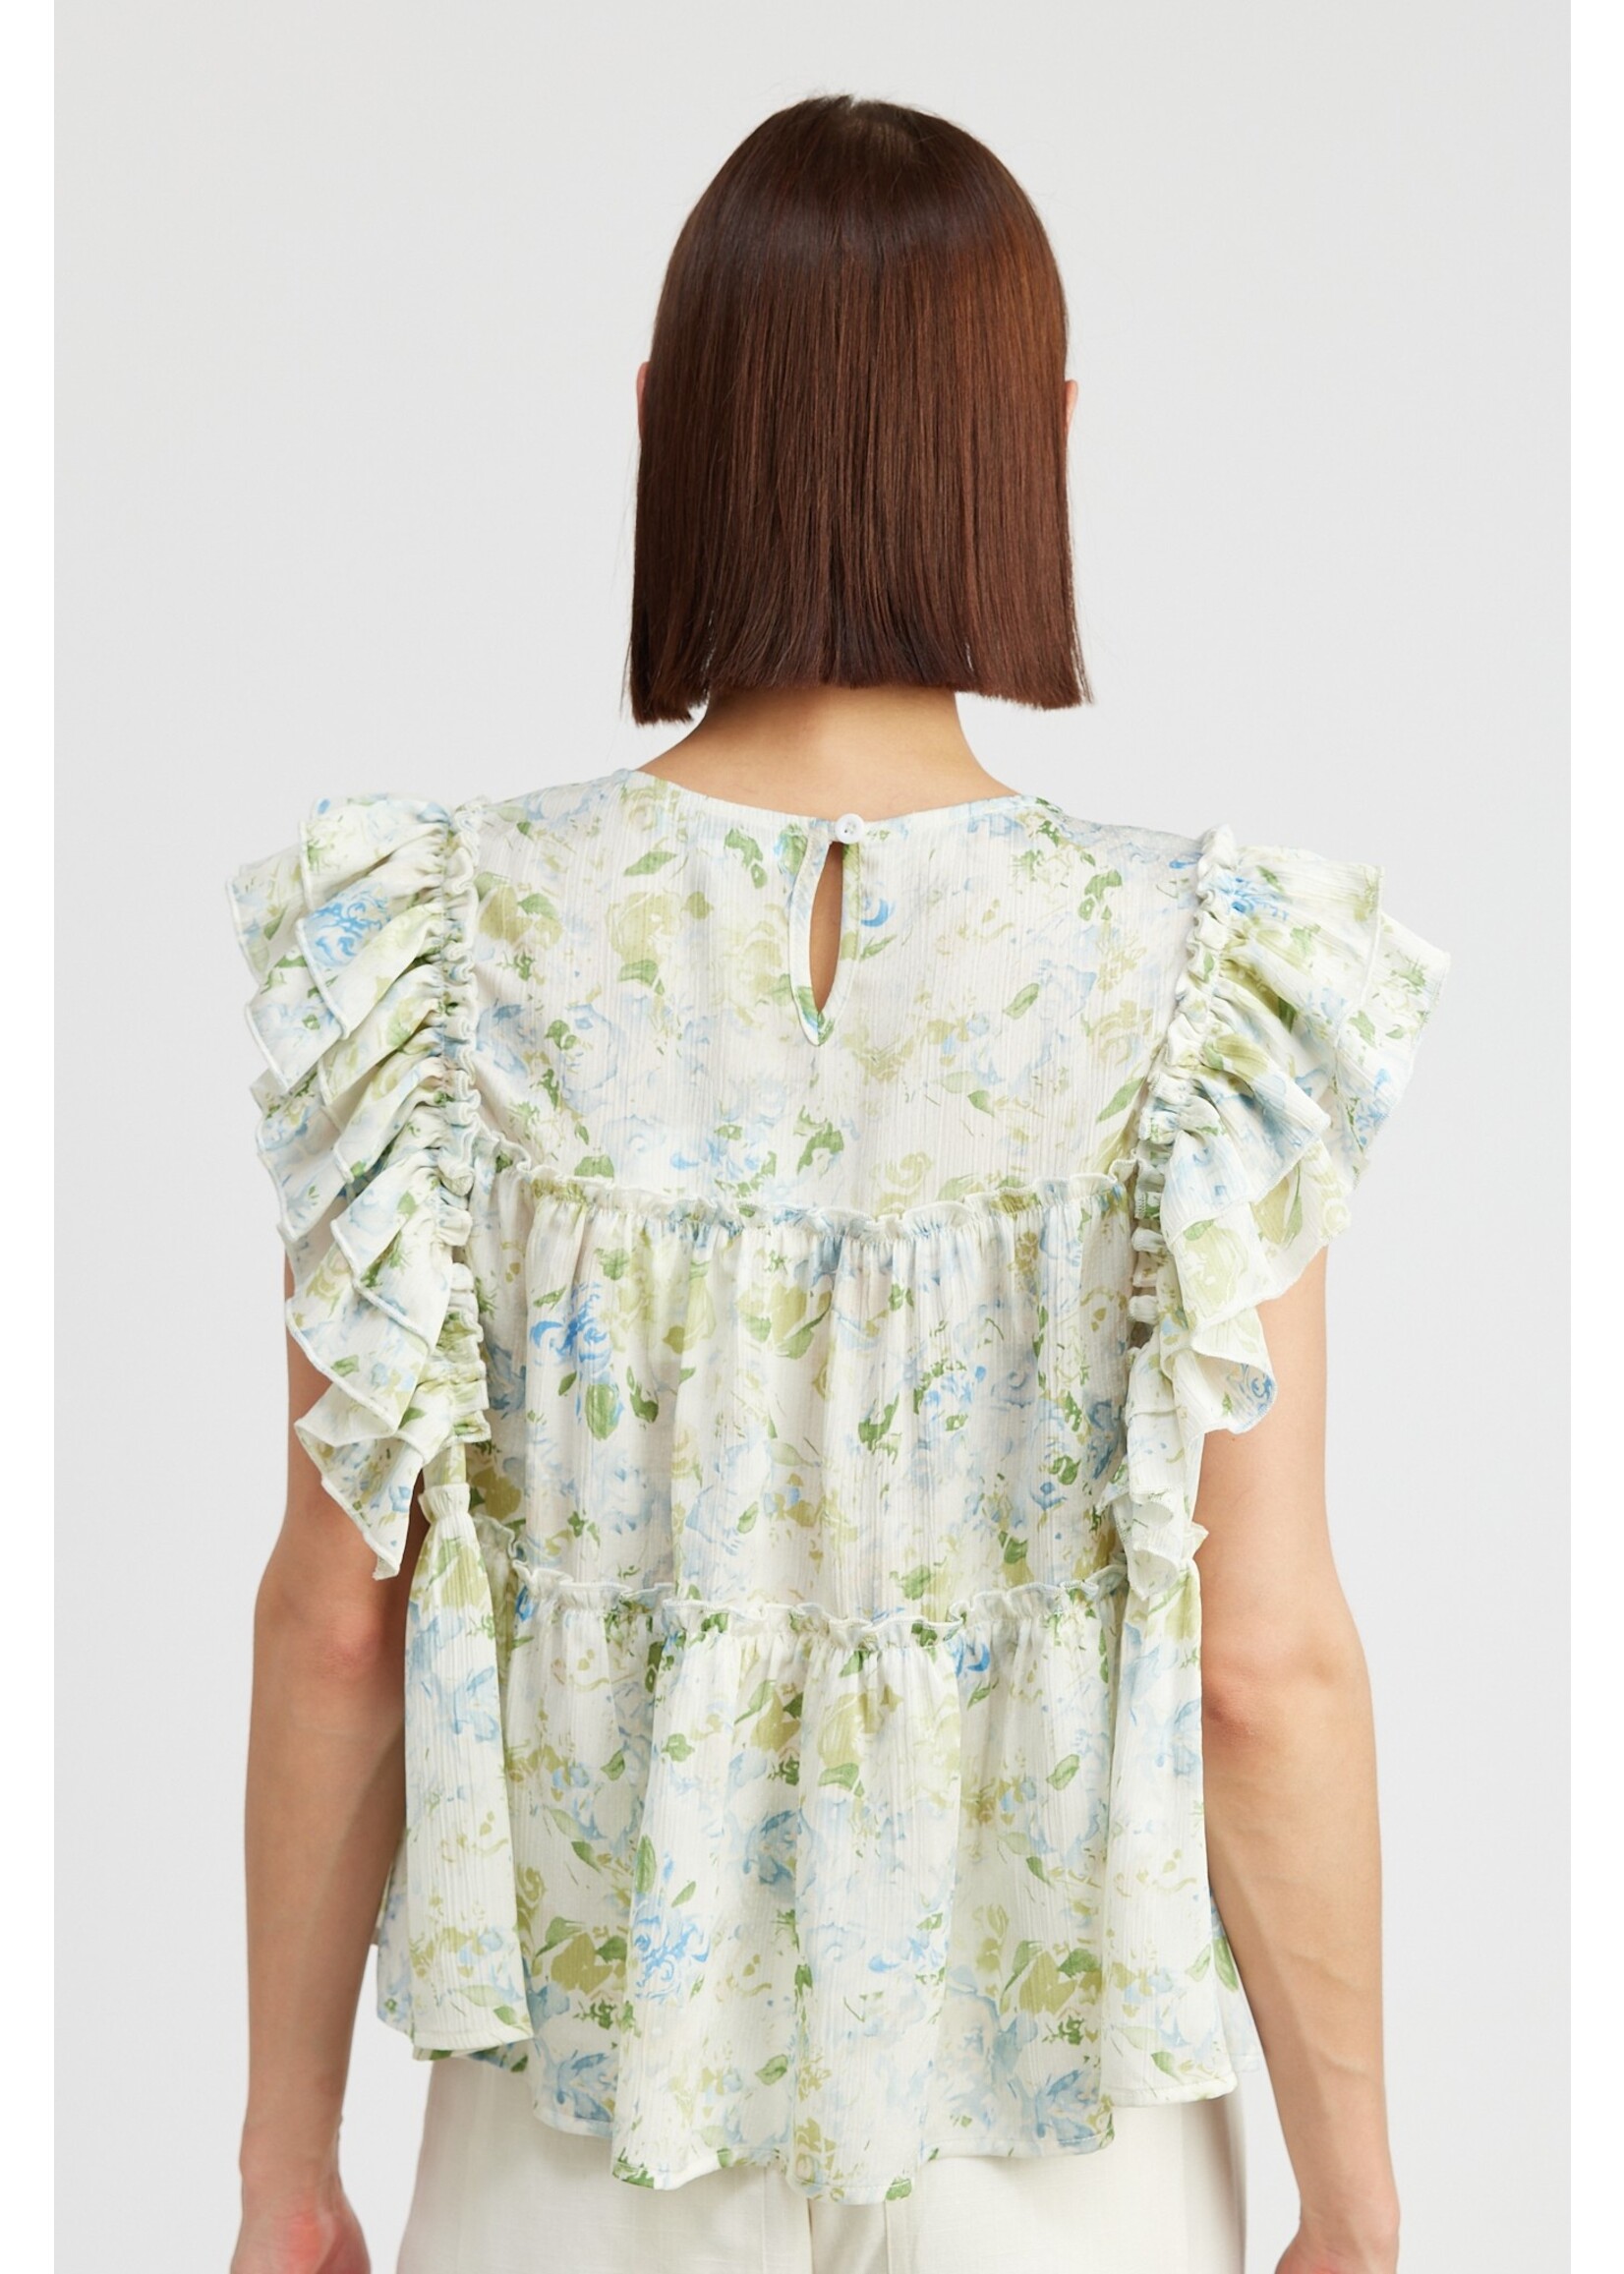 jacquie the label Floral Printed Ruffle Blouse - ISK2224T